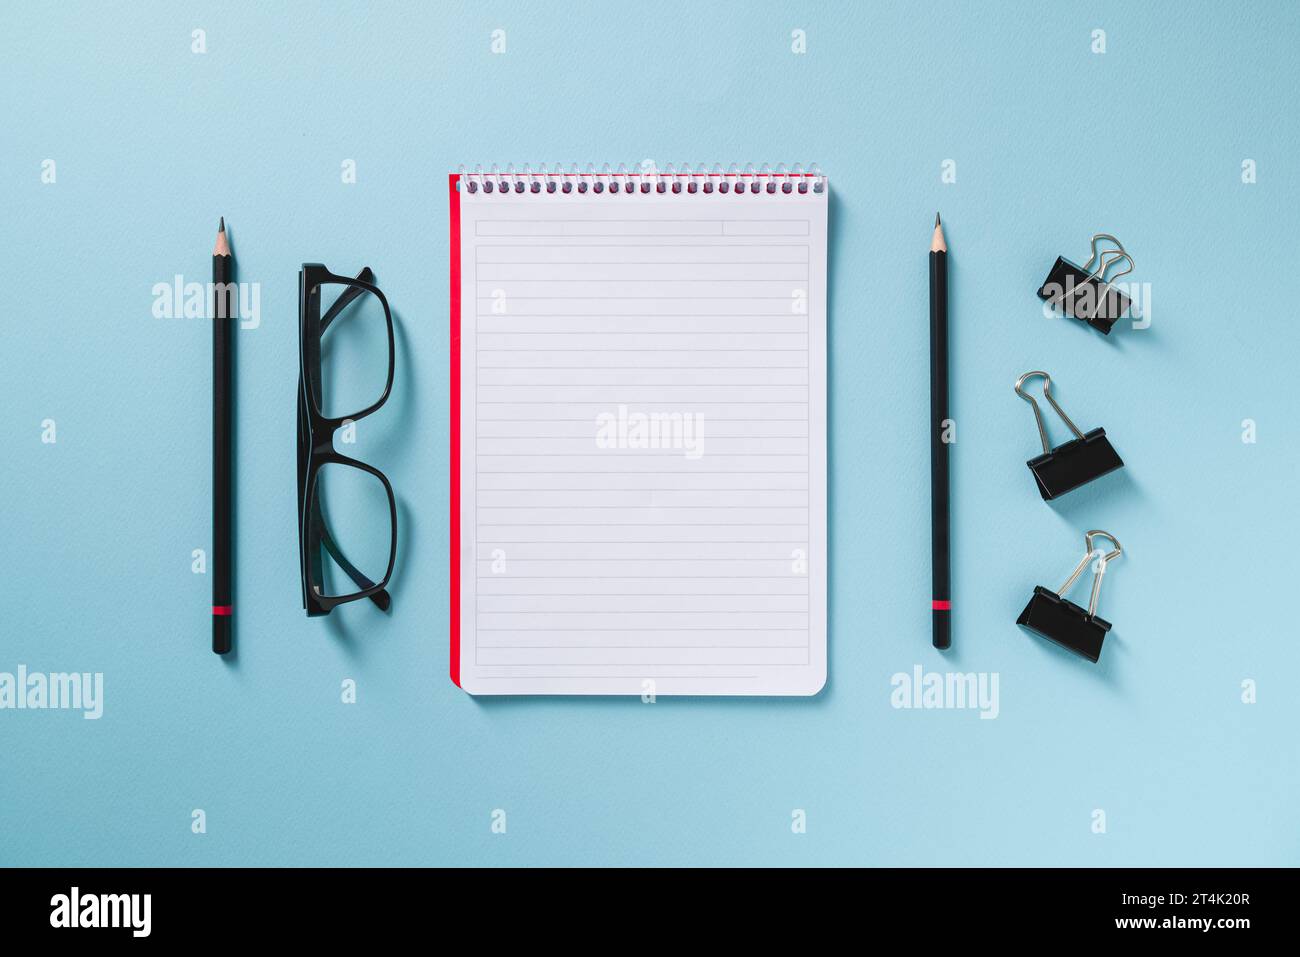 Top view of empty notebook, glasses, and pen on blue office desk Stock Photo